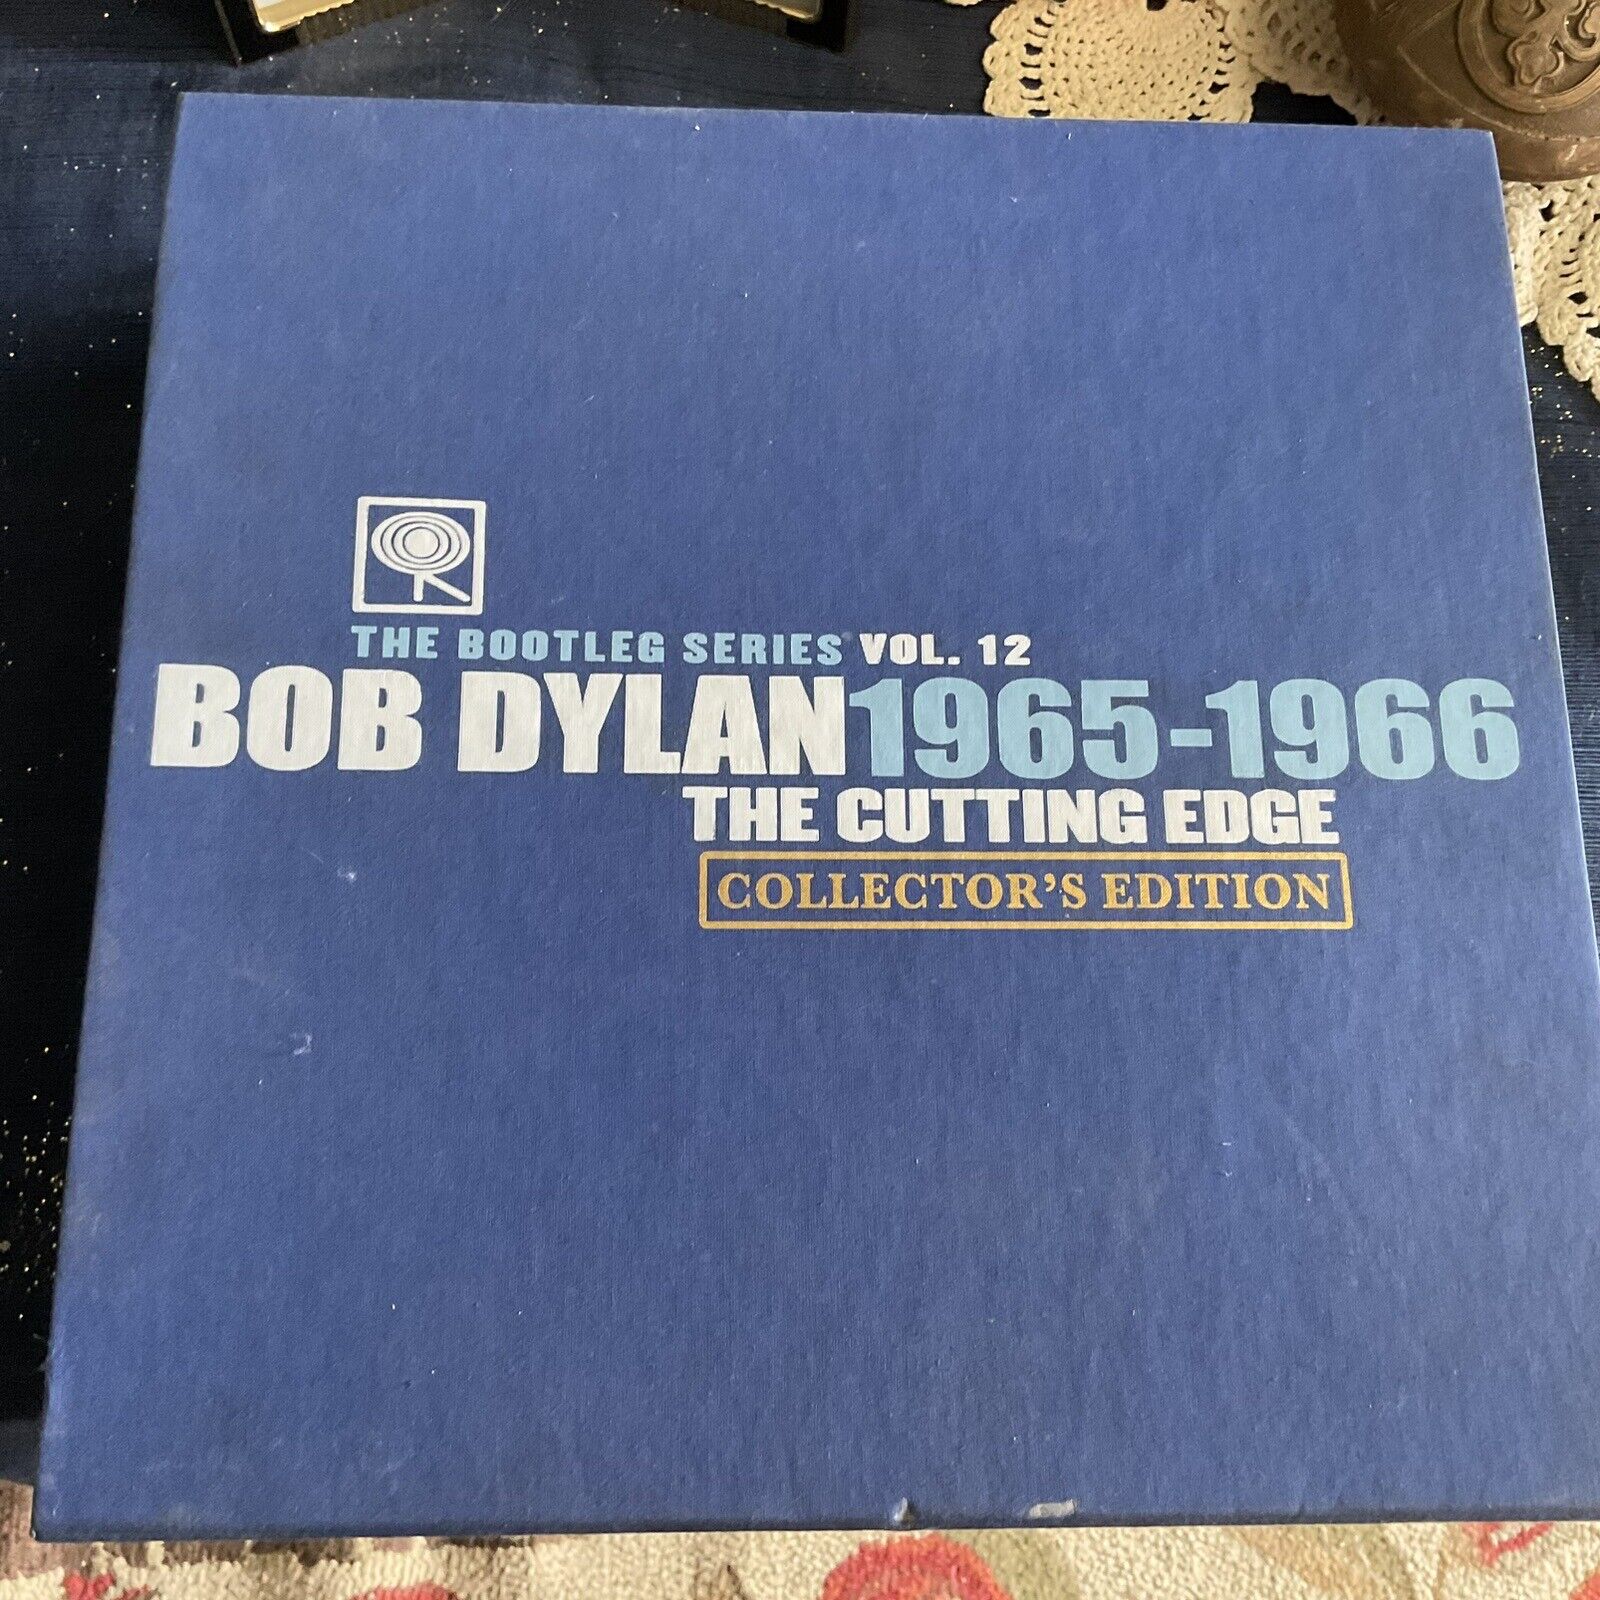 Bob Dylan:  Bootleg Series Vol. 12 -The Cutting Edge - COLLECTOR’S EDITION #4187